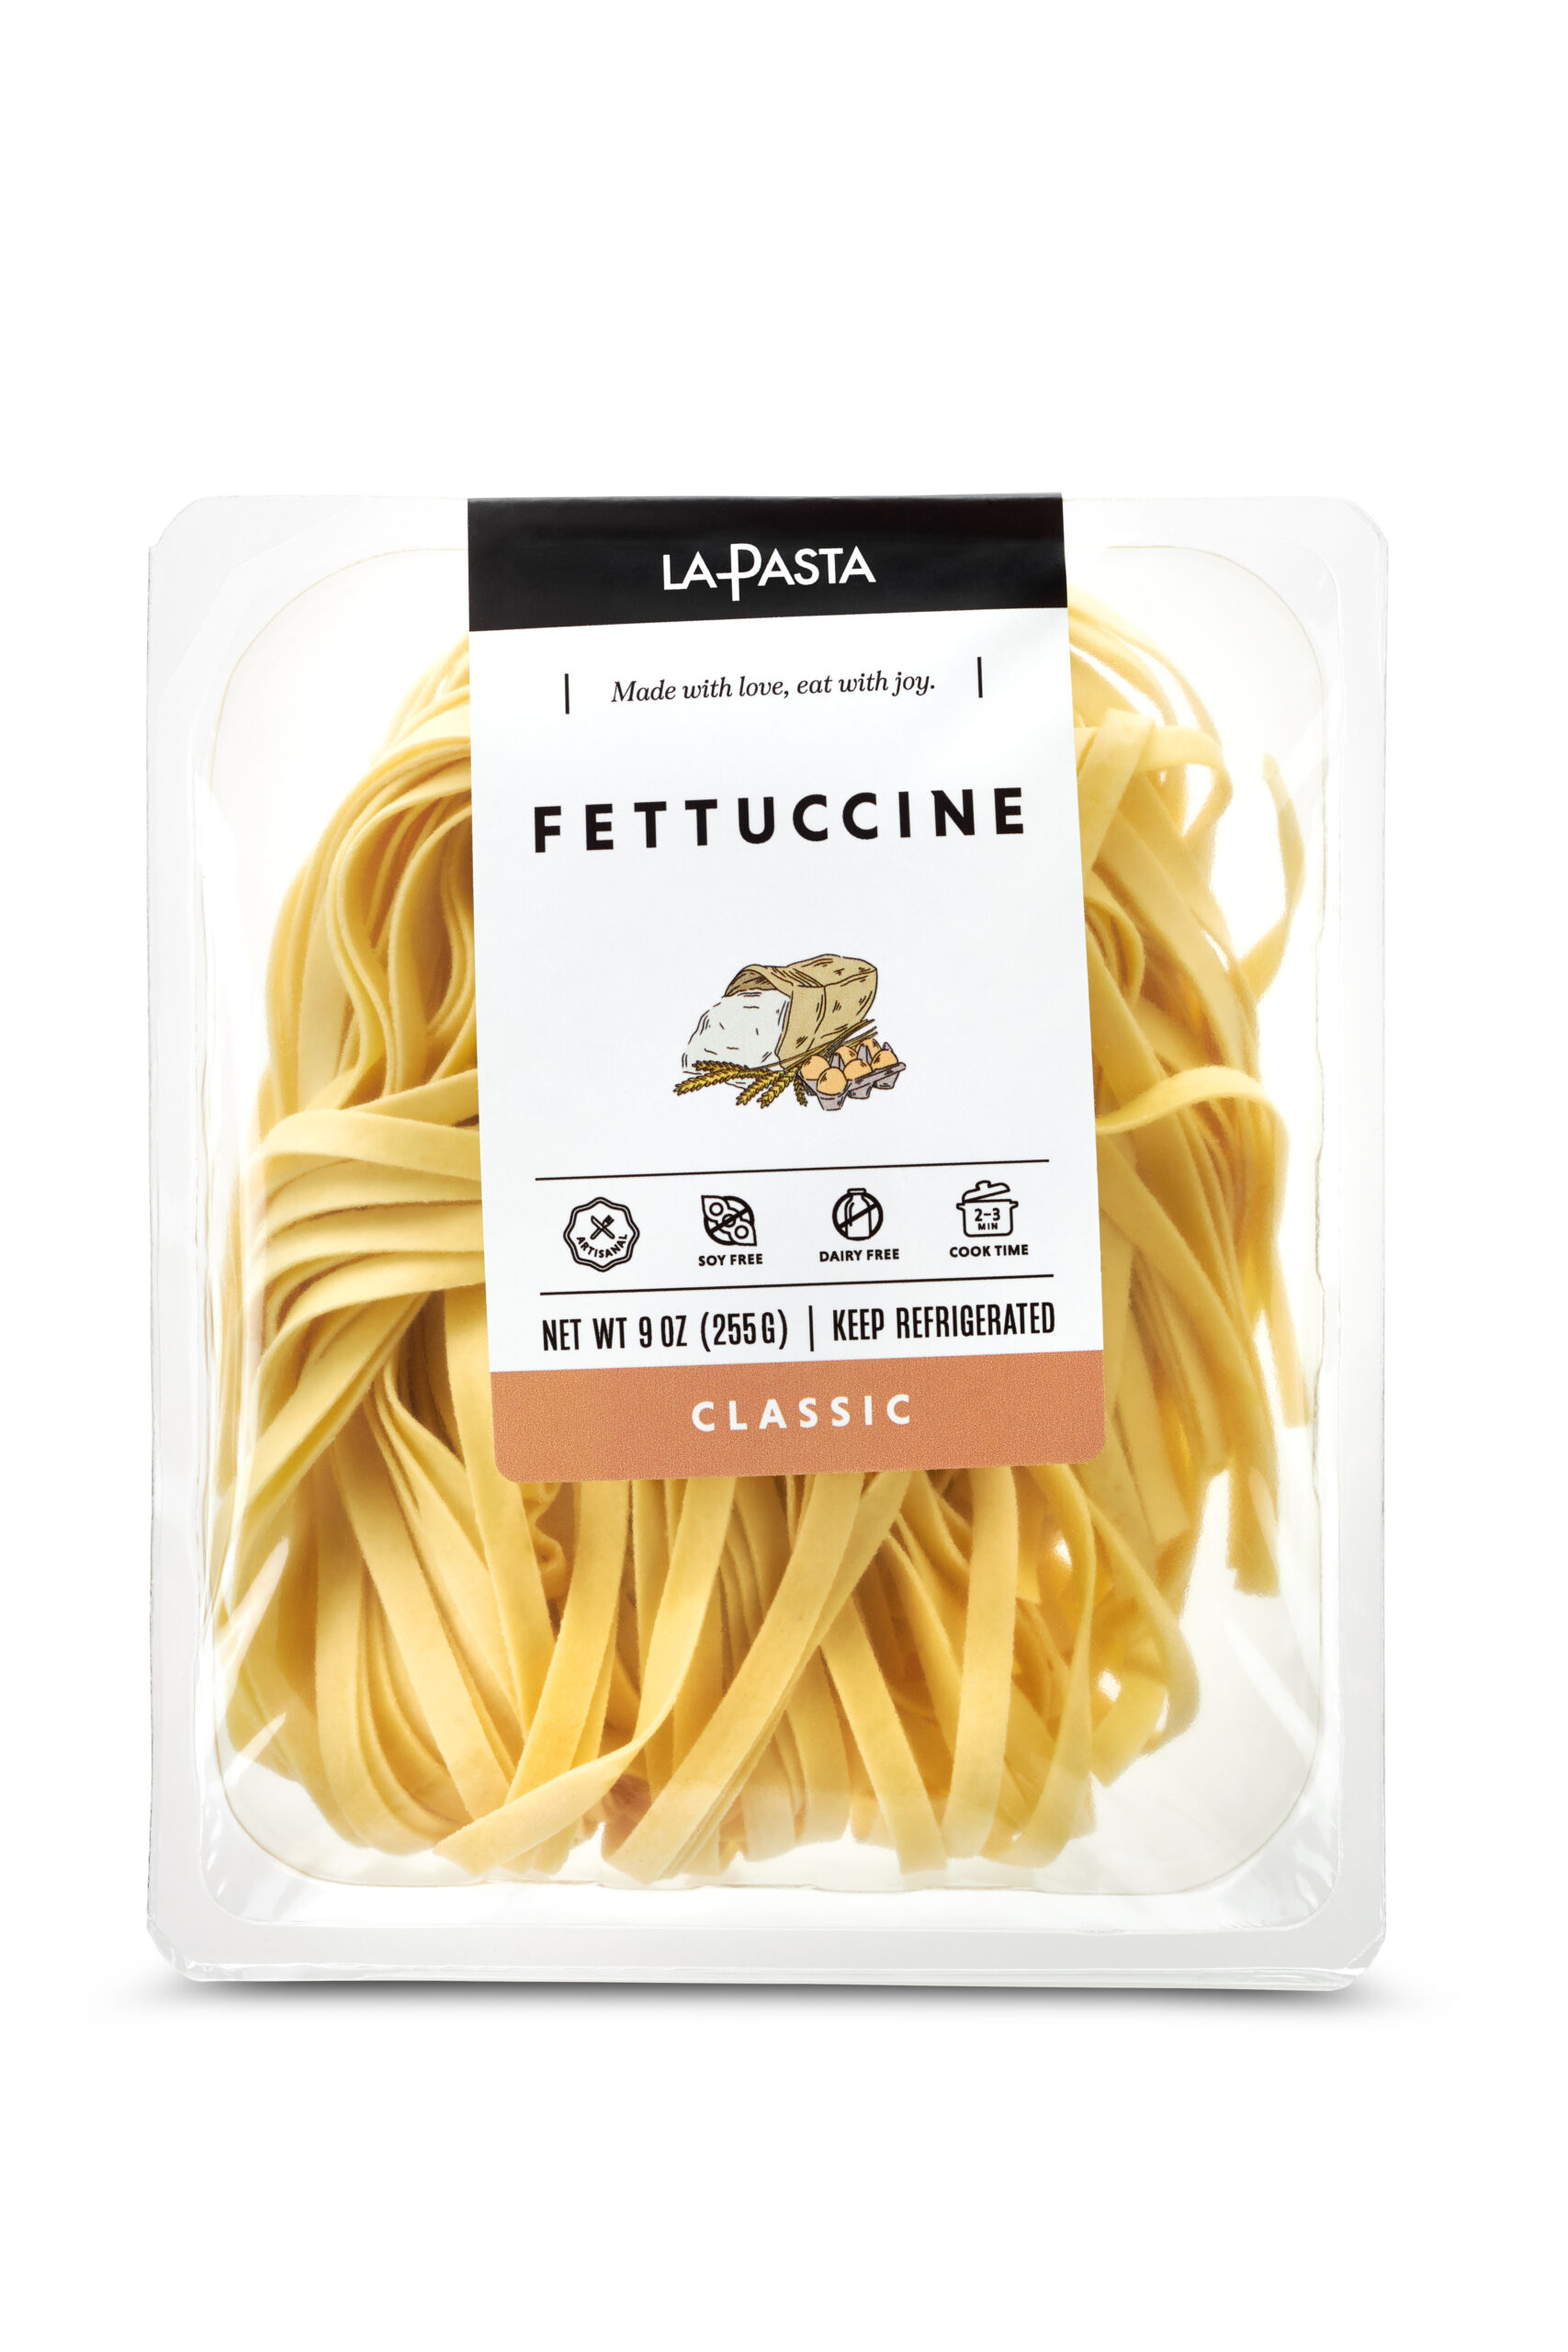 A package of fettuccine pasta is shown.